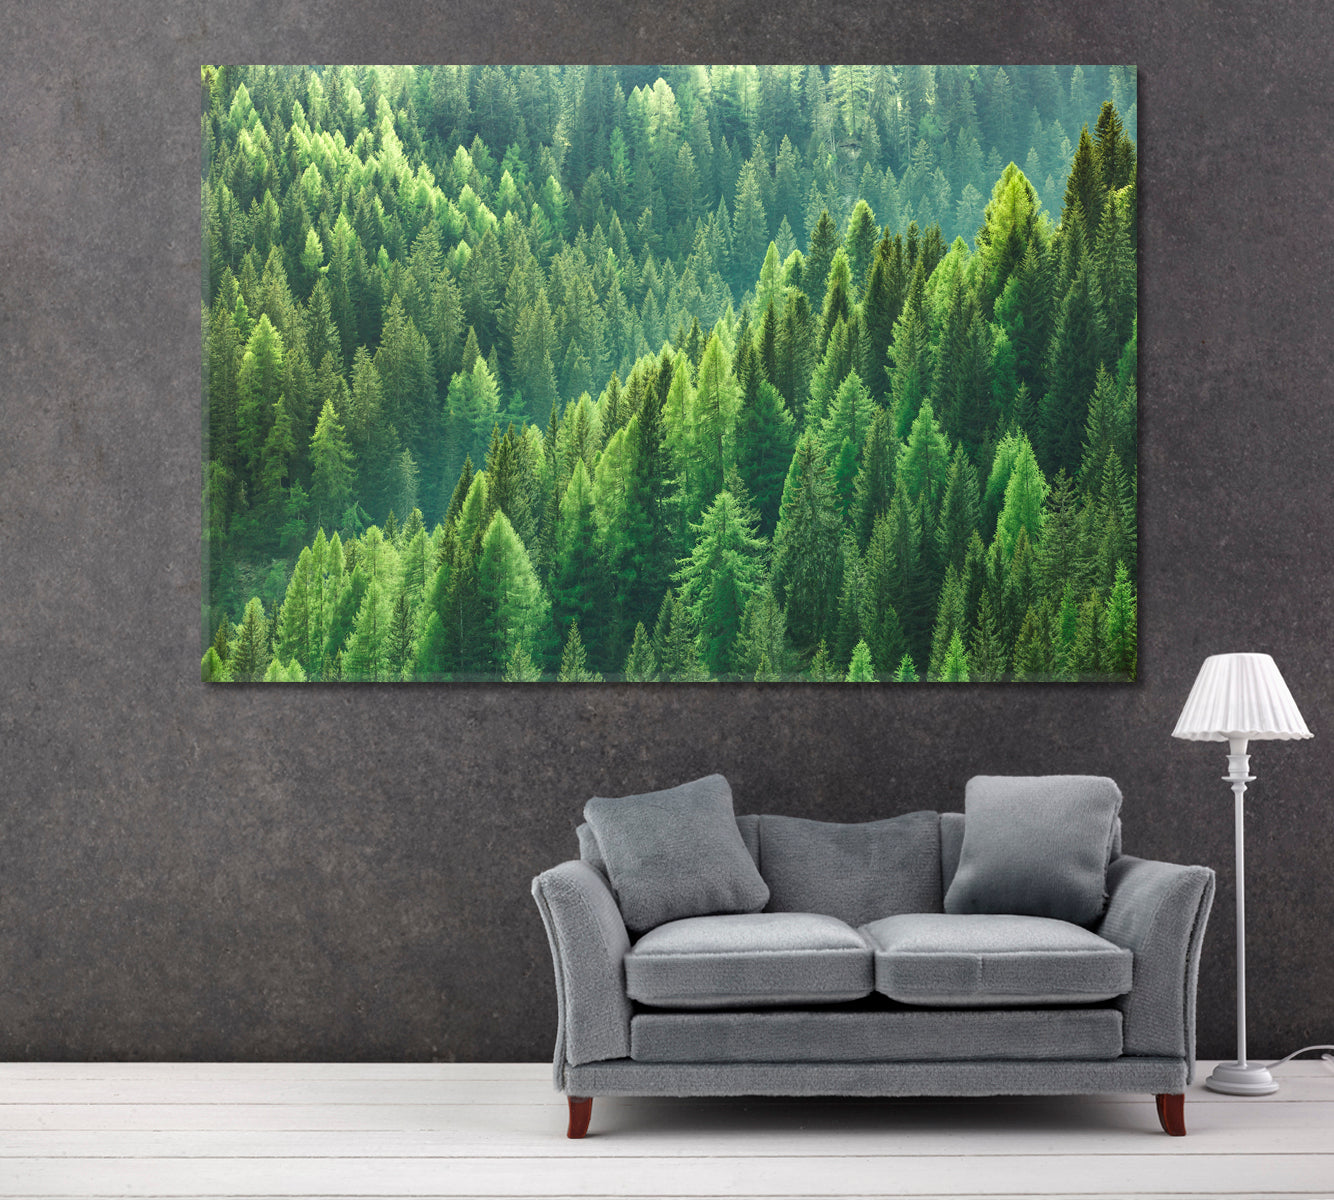 Green Forest of Fir and Pine Trees Canvas Print ArtLexy 1 Panel 24"x16" inches 